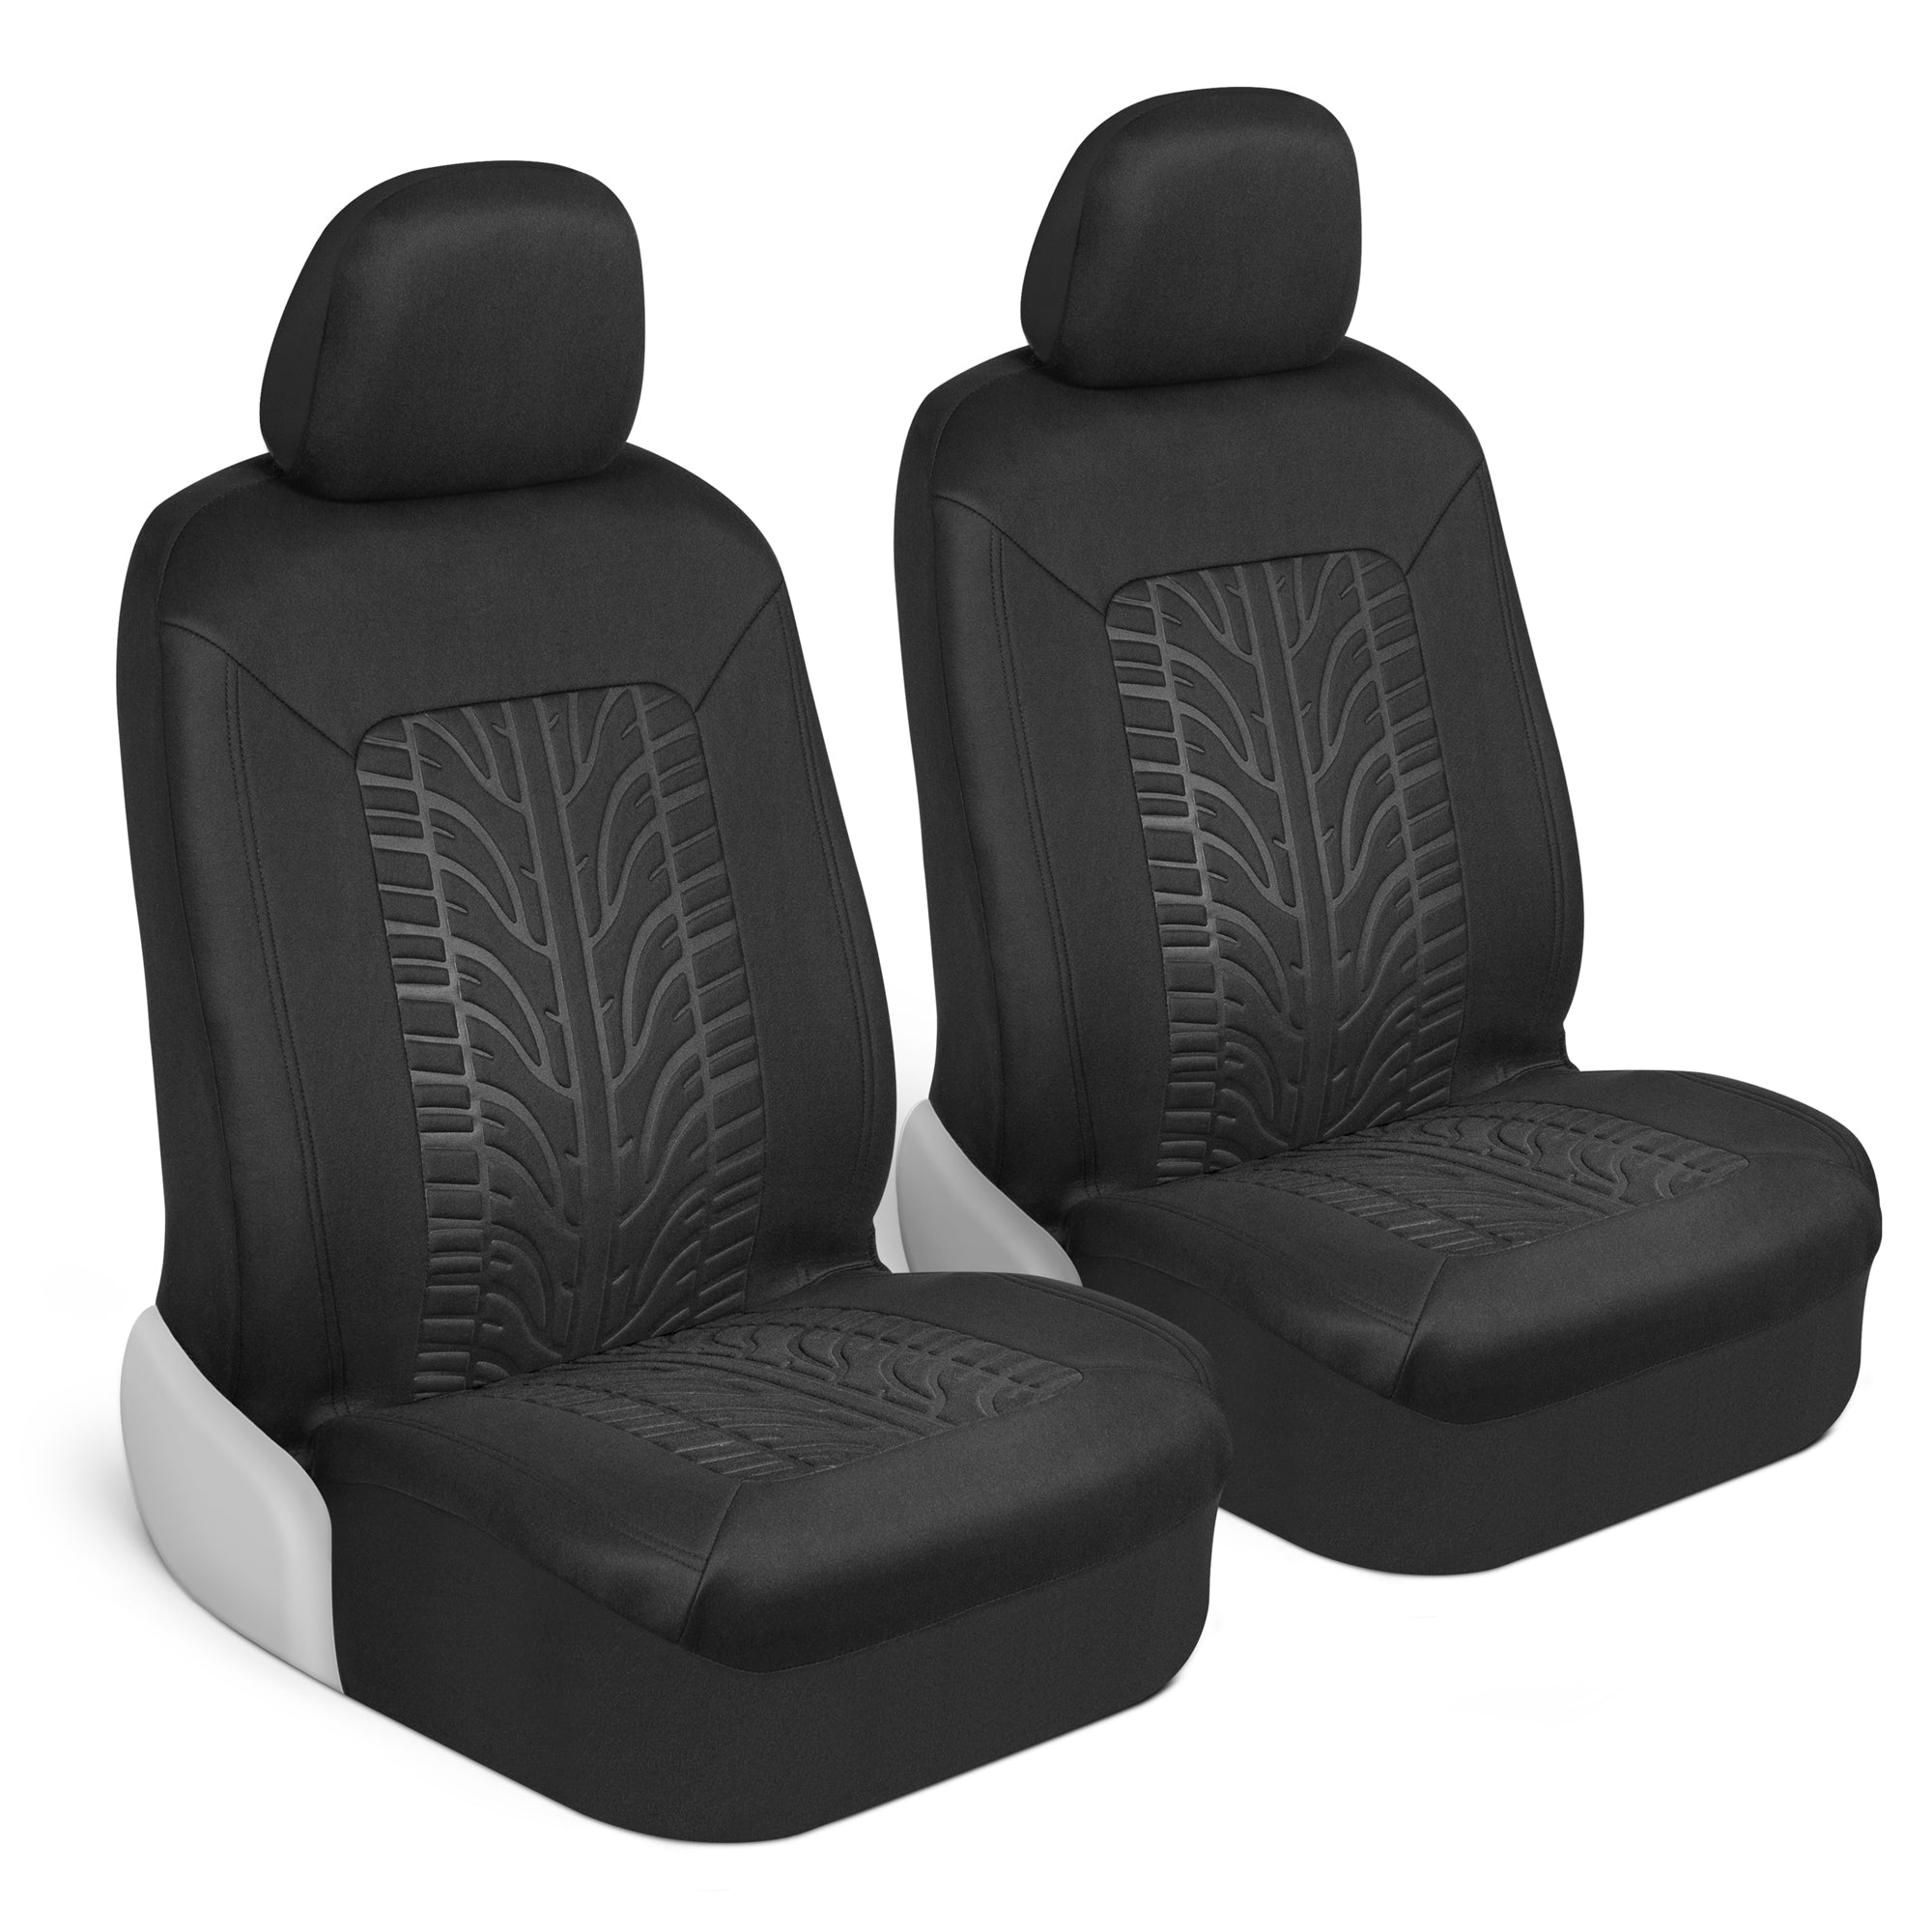 Motor Trend GrandPrix Seat Covers for Cars, Black Tire Tread Embossed Car Seat Covers for Front Seats, Automotive Interior Covers for Car Truck Van SUV, 2 Count (Pack of 1)